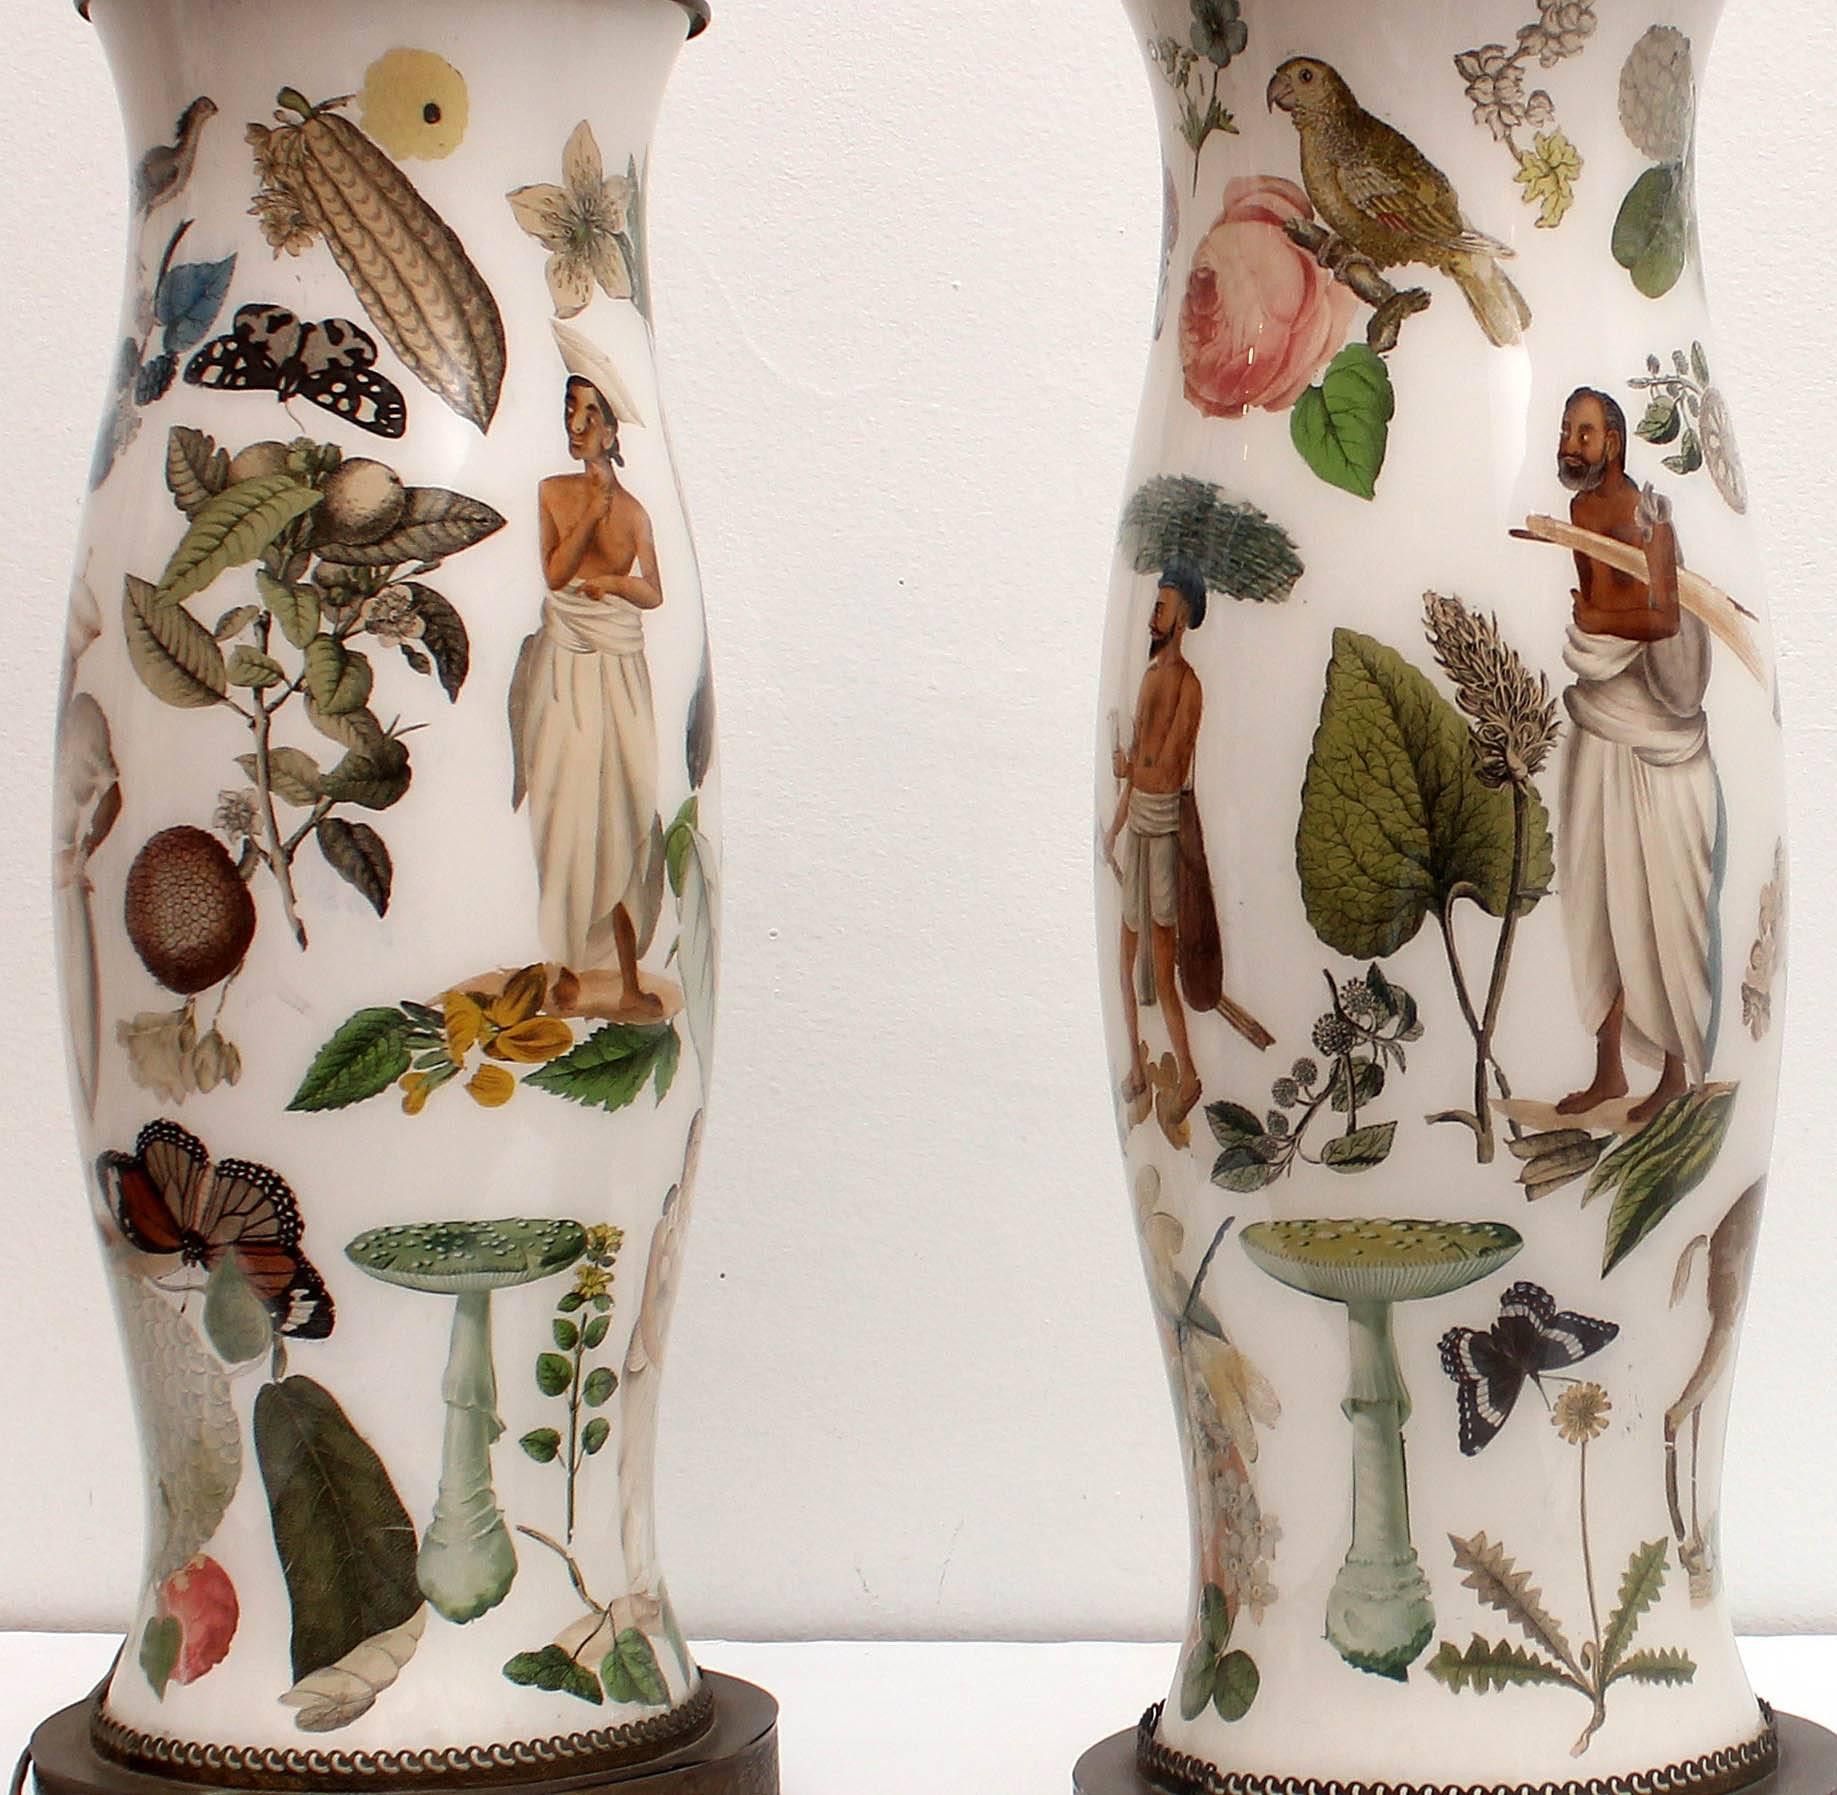 Pair of antique reverse decorated decalcomanie glass lamps. Bright and colorful, they are decorated with exotic flora, fauna, and eastern figures in ethnic dress. Decalcomanie, is a decorative technique by which engravings and prints may be